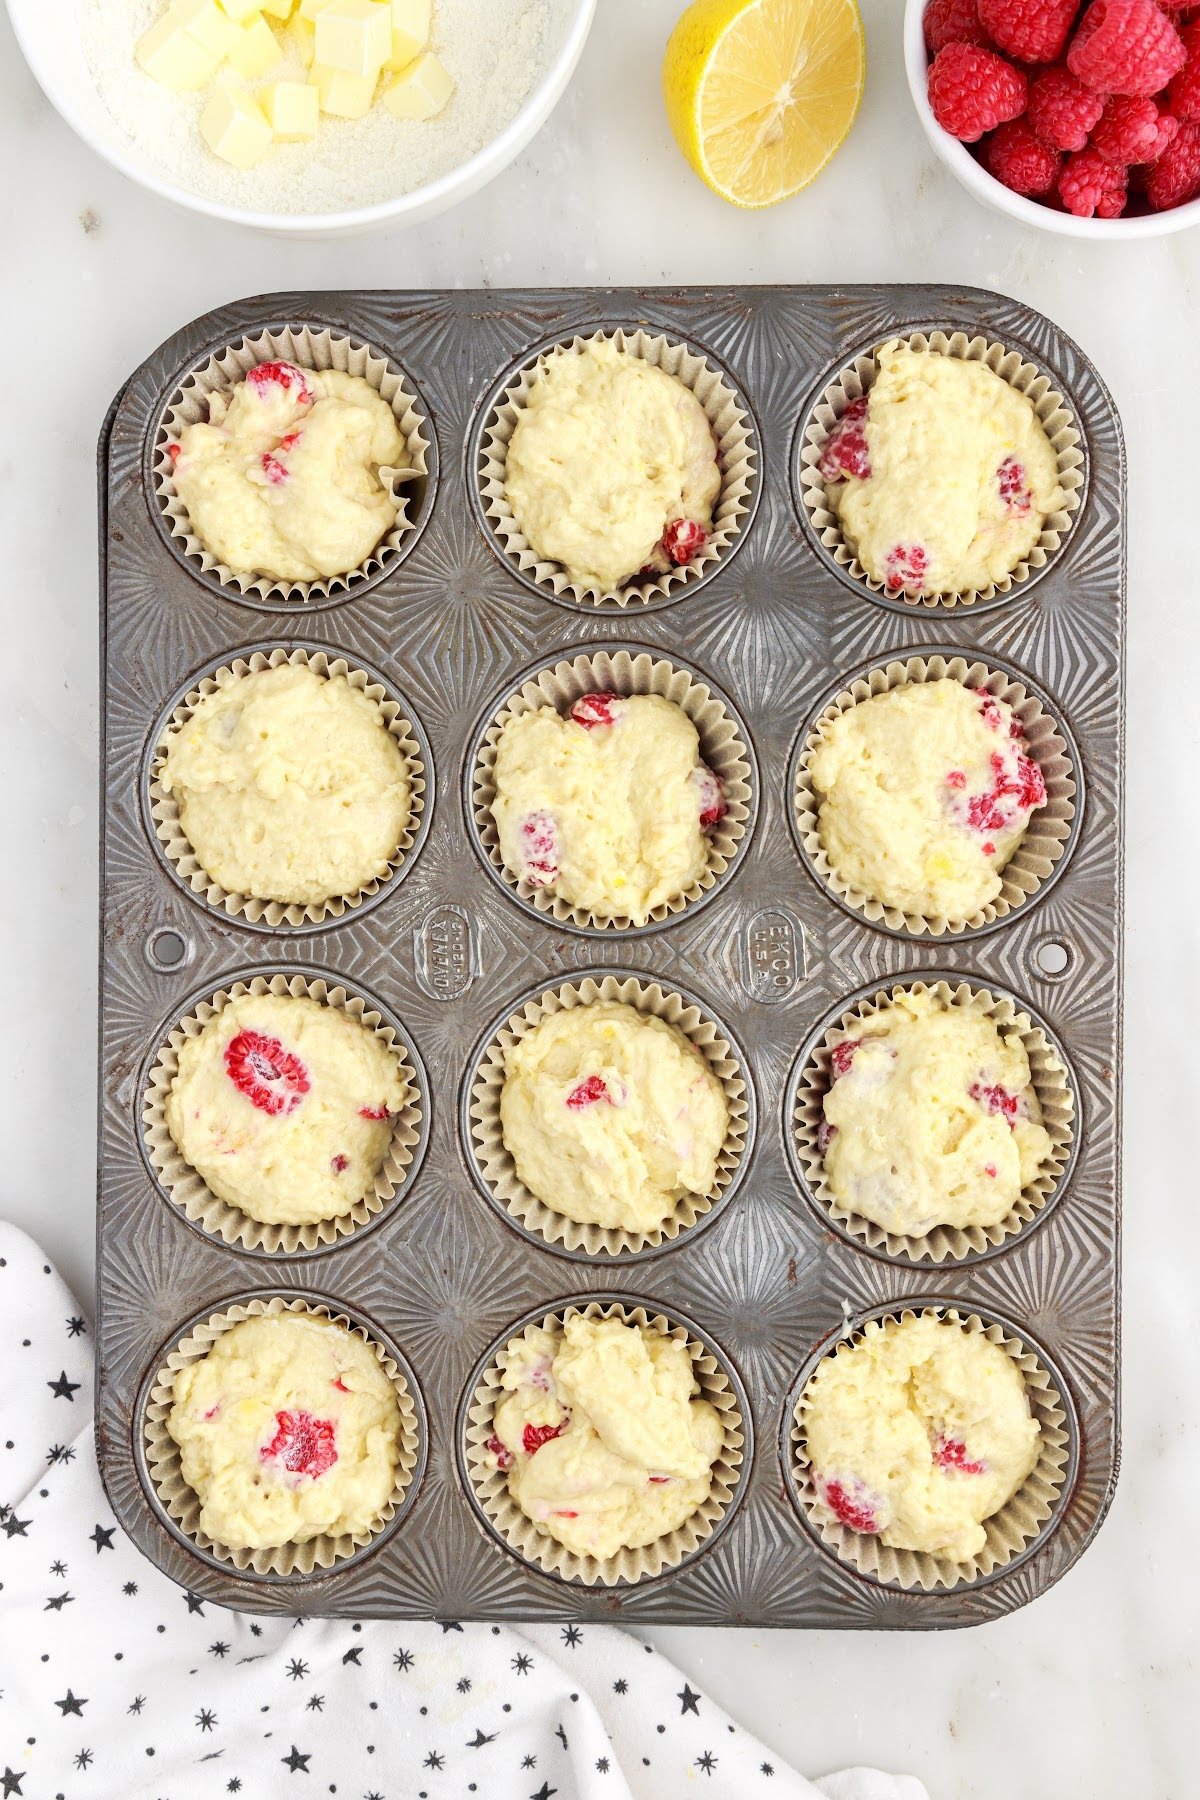 Lined muffin tin filled with Raspberry Lemon Muffin batter.